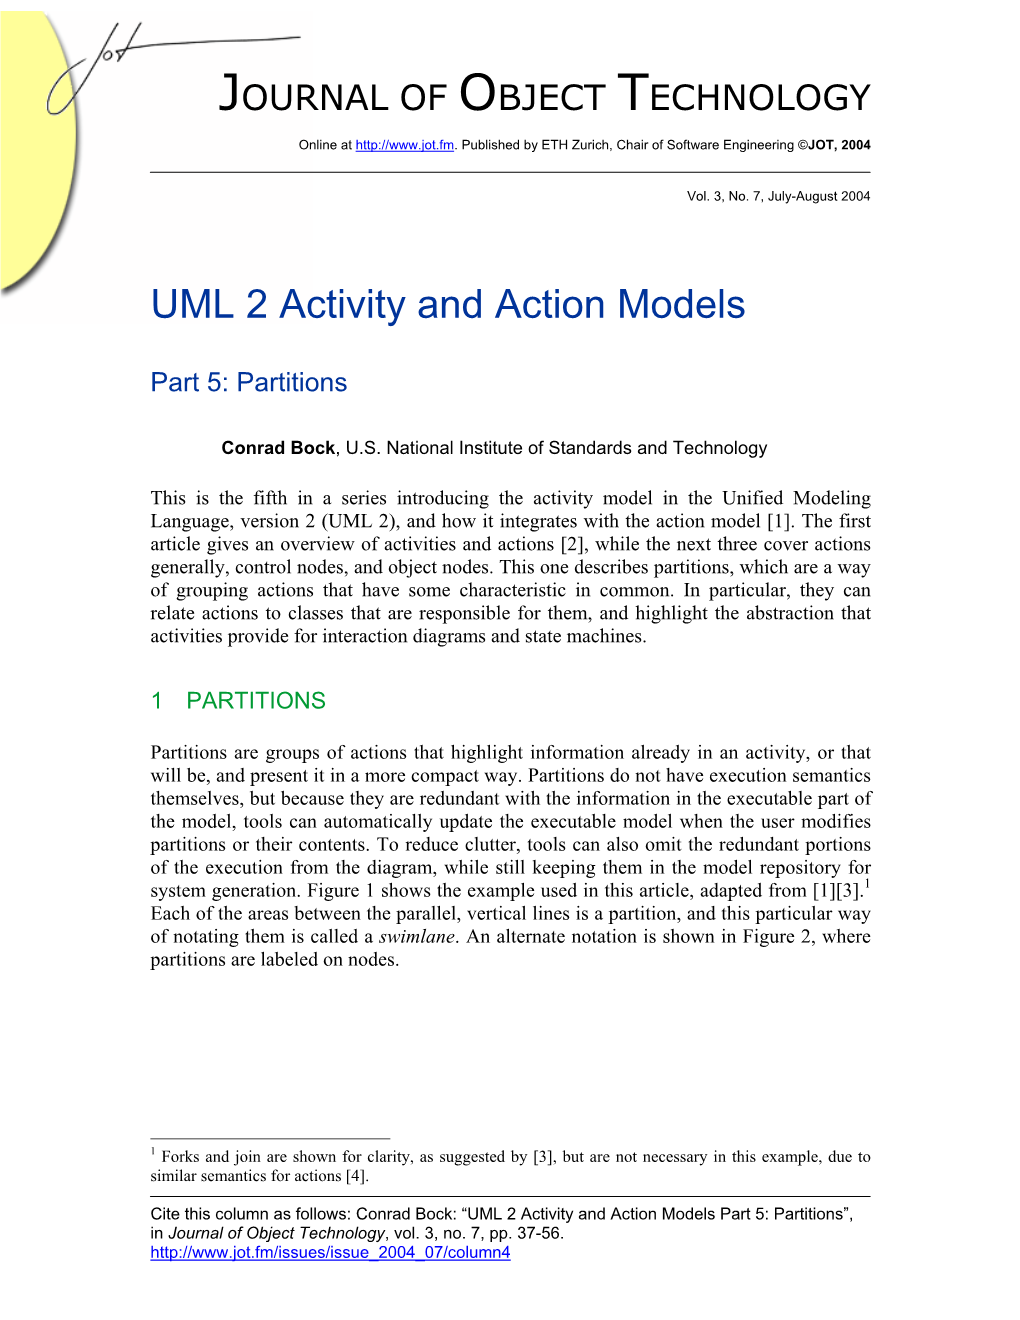 UML 2 Activity and Action Models